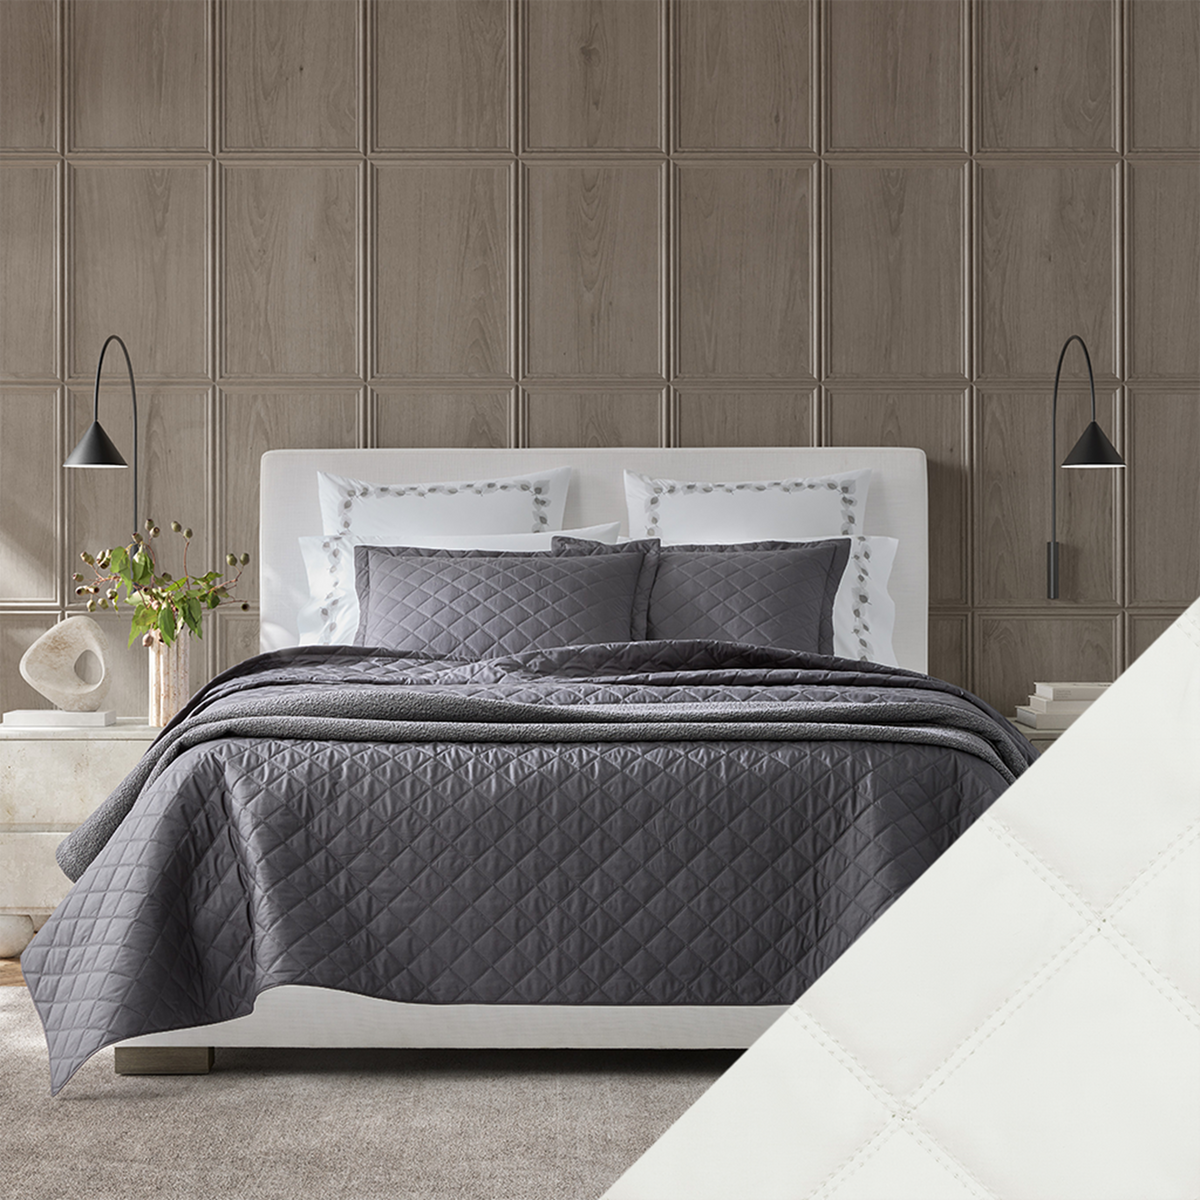 Bed Dressed in Matouk Milano Quilt Bedding with Swatch in Color Bone